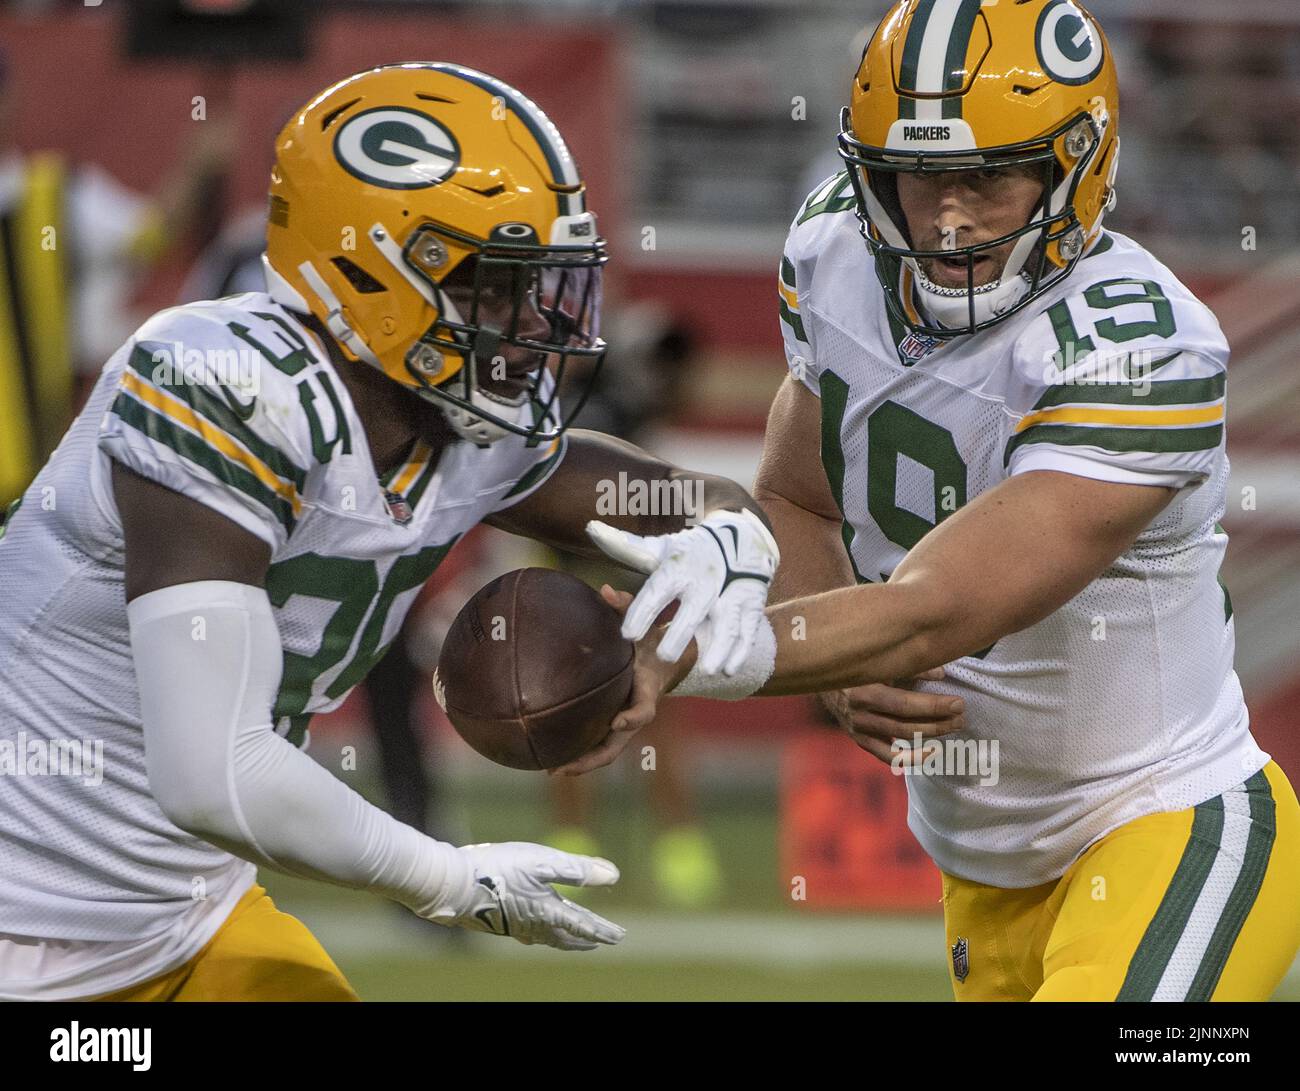 Santa Clara, USA. 13th Aug, 2022. Green Bay Packers quarterback Danny Etling (19) hands off to running back BJ Baylor (35) in the third quarter against the San Francisco 49ers at Levi's Stadium in Santa Clara, California on Friday, August 12, 2022. The 49ers defeated the Packers 28-21 in their first preseason game Photo by Terry Schmitt/UPI Credit: UPI/Alamy Live News Stock Photo